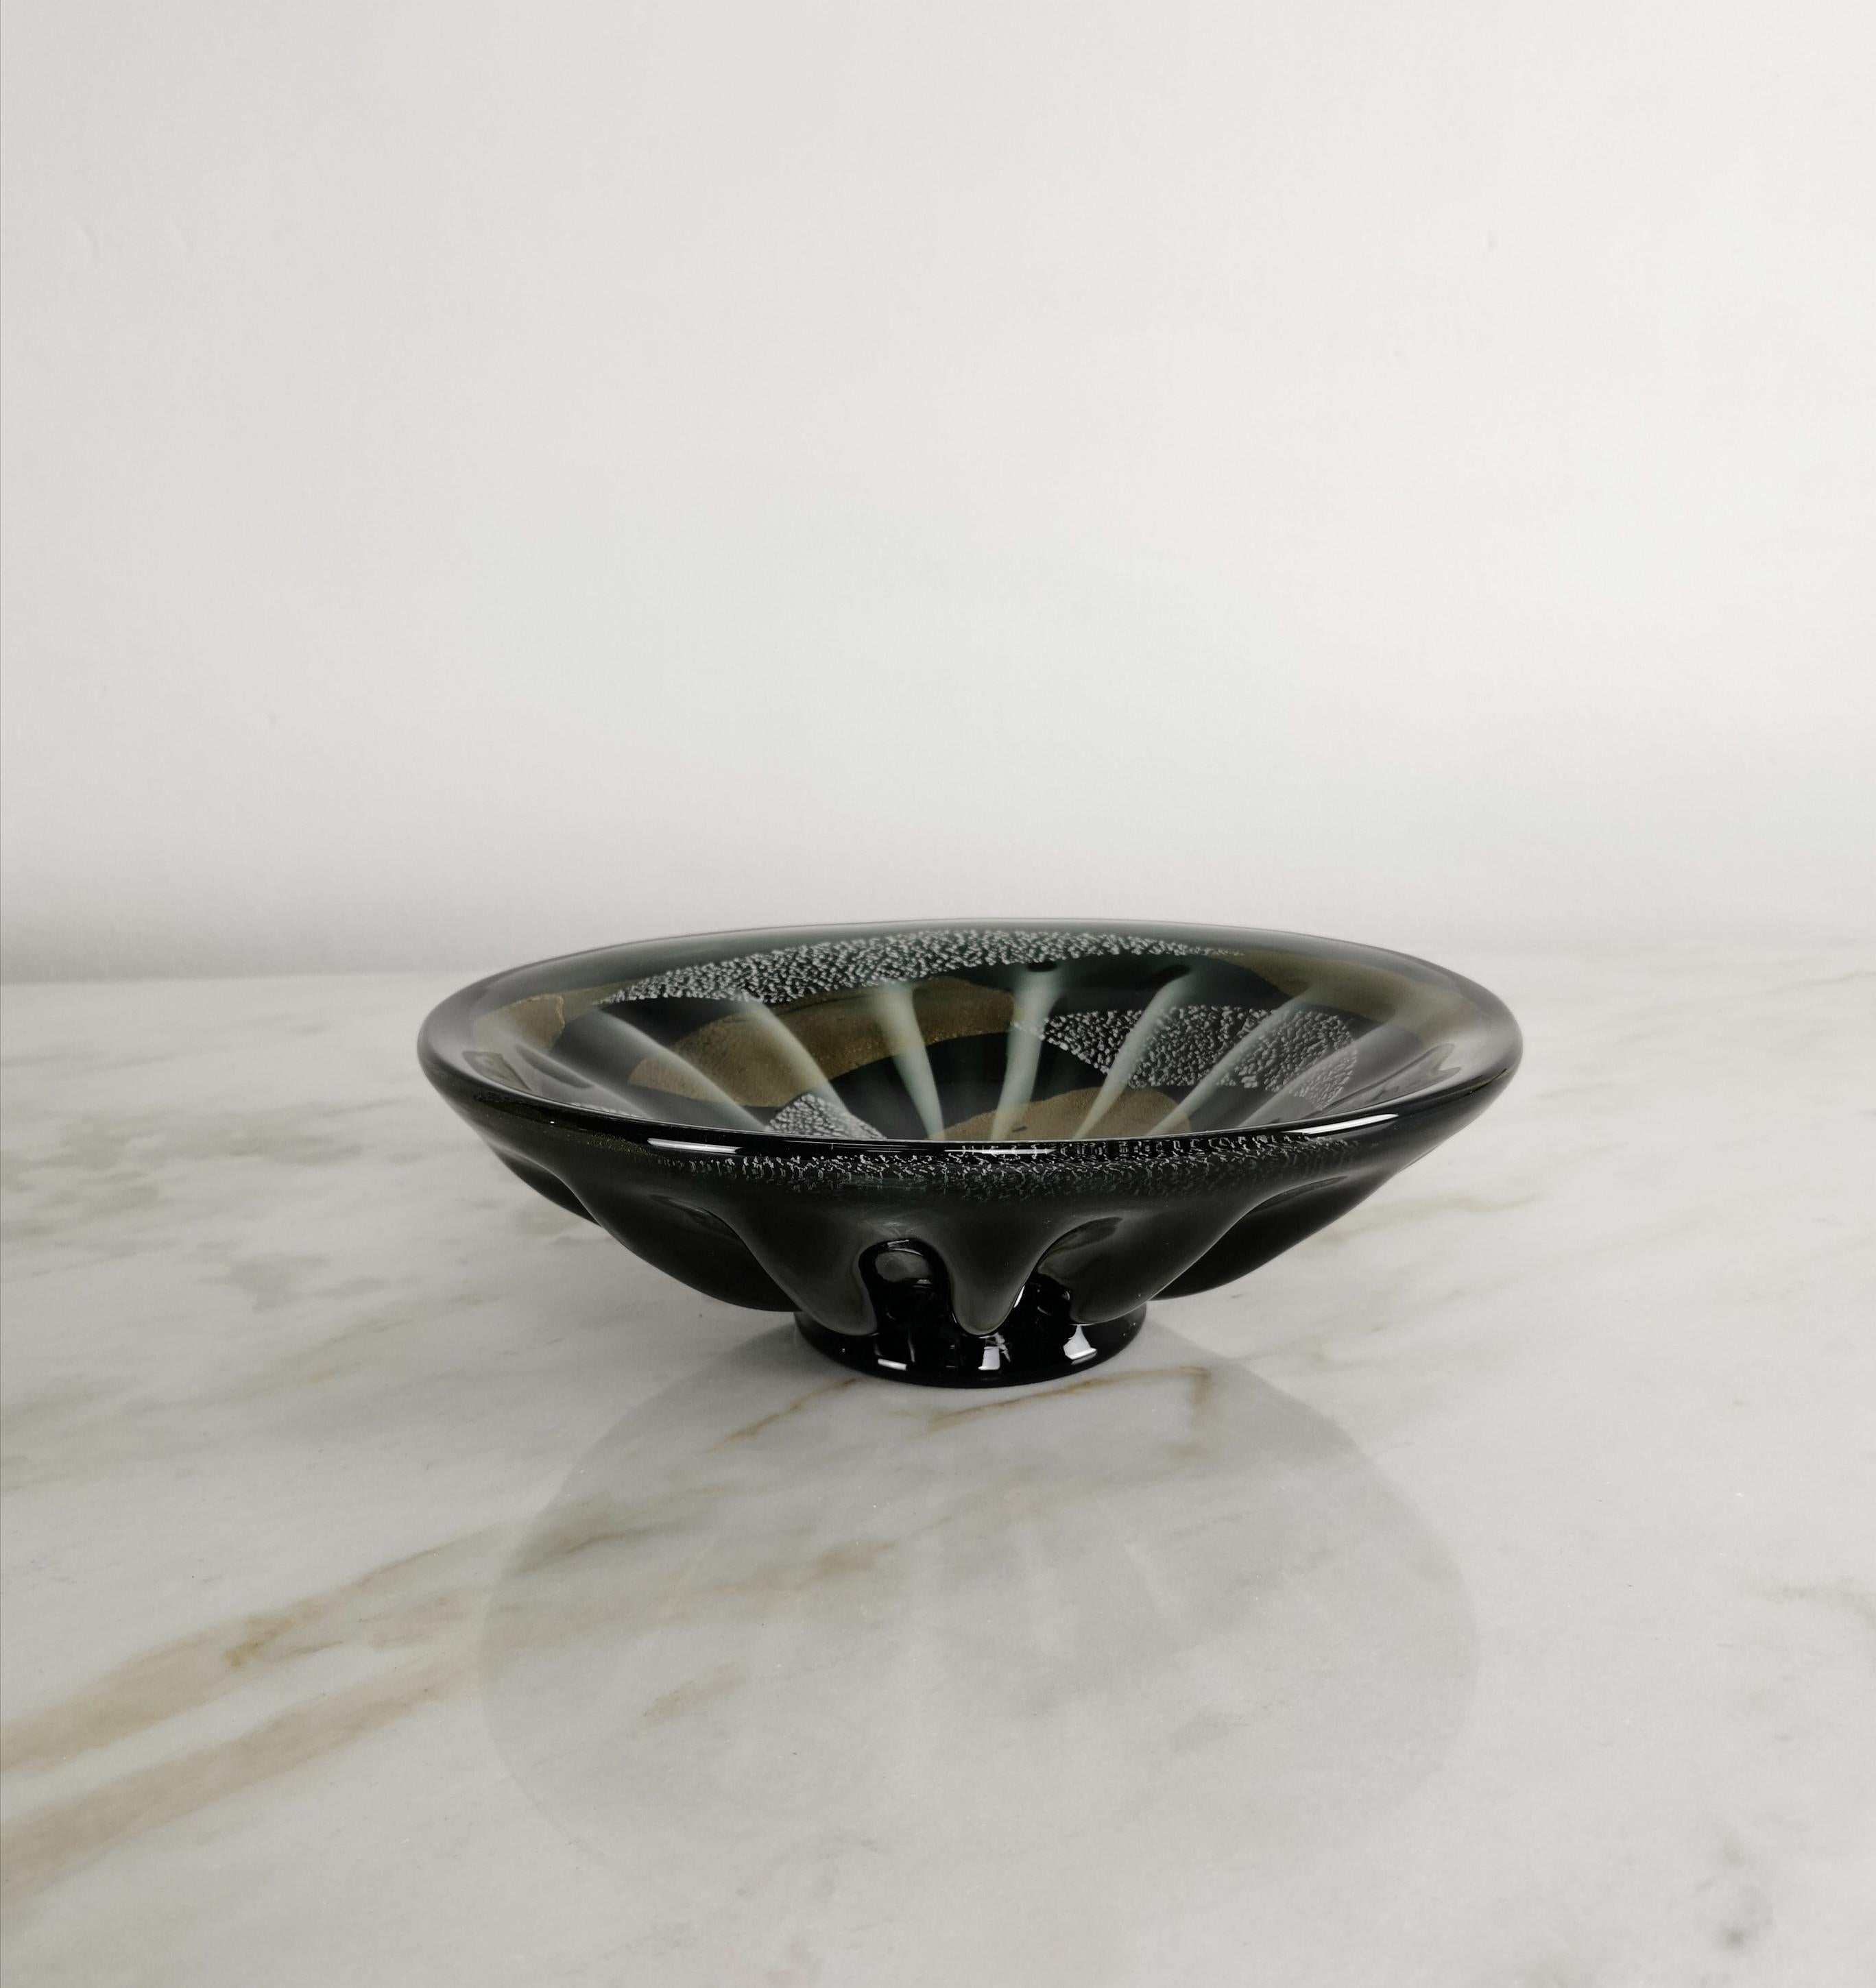 Centerpiece attributed to Giulio Radi and produced in the 60s by A.ve.M. .  
 Centerpiece in Murano glass with a circular cup externally grooved and black layered with internal abstract gold decorations. 